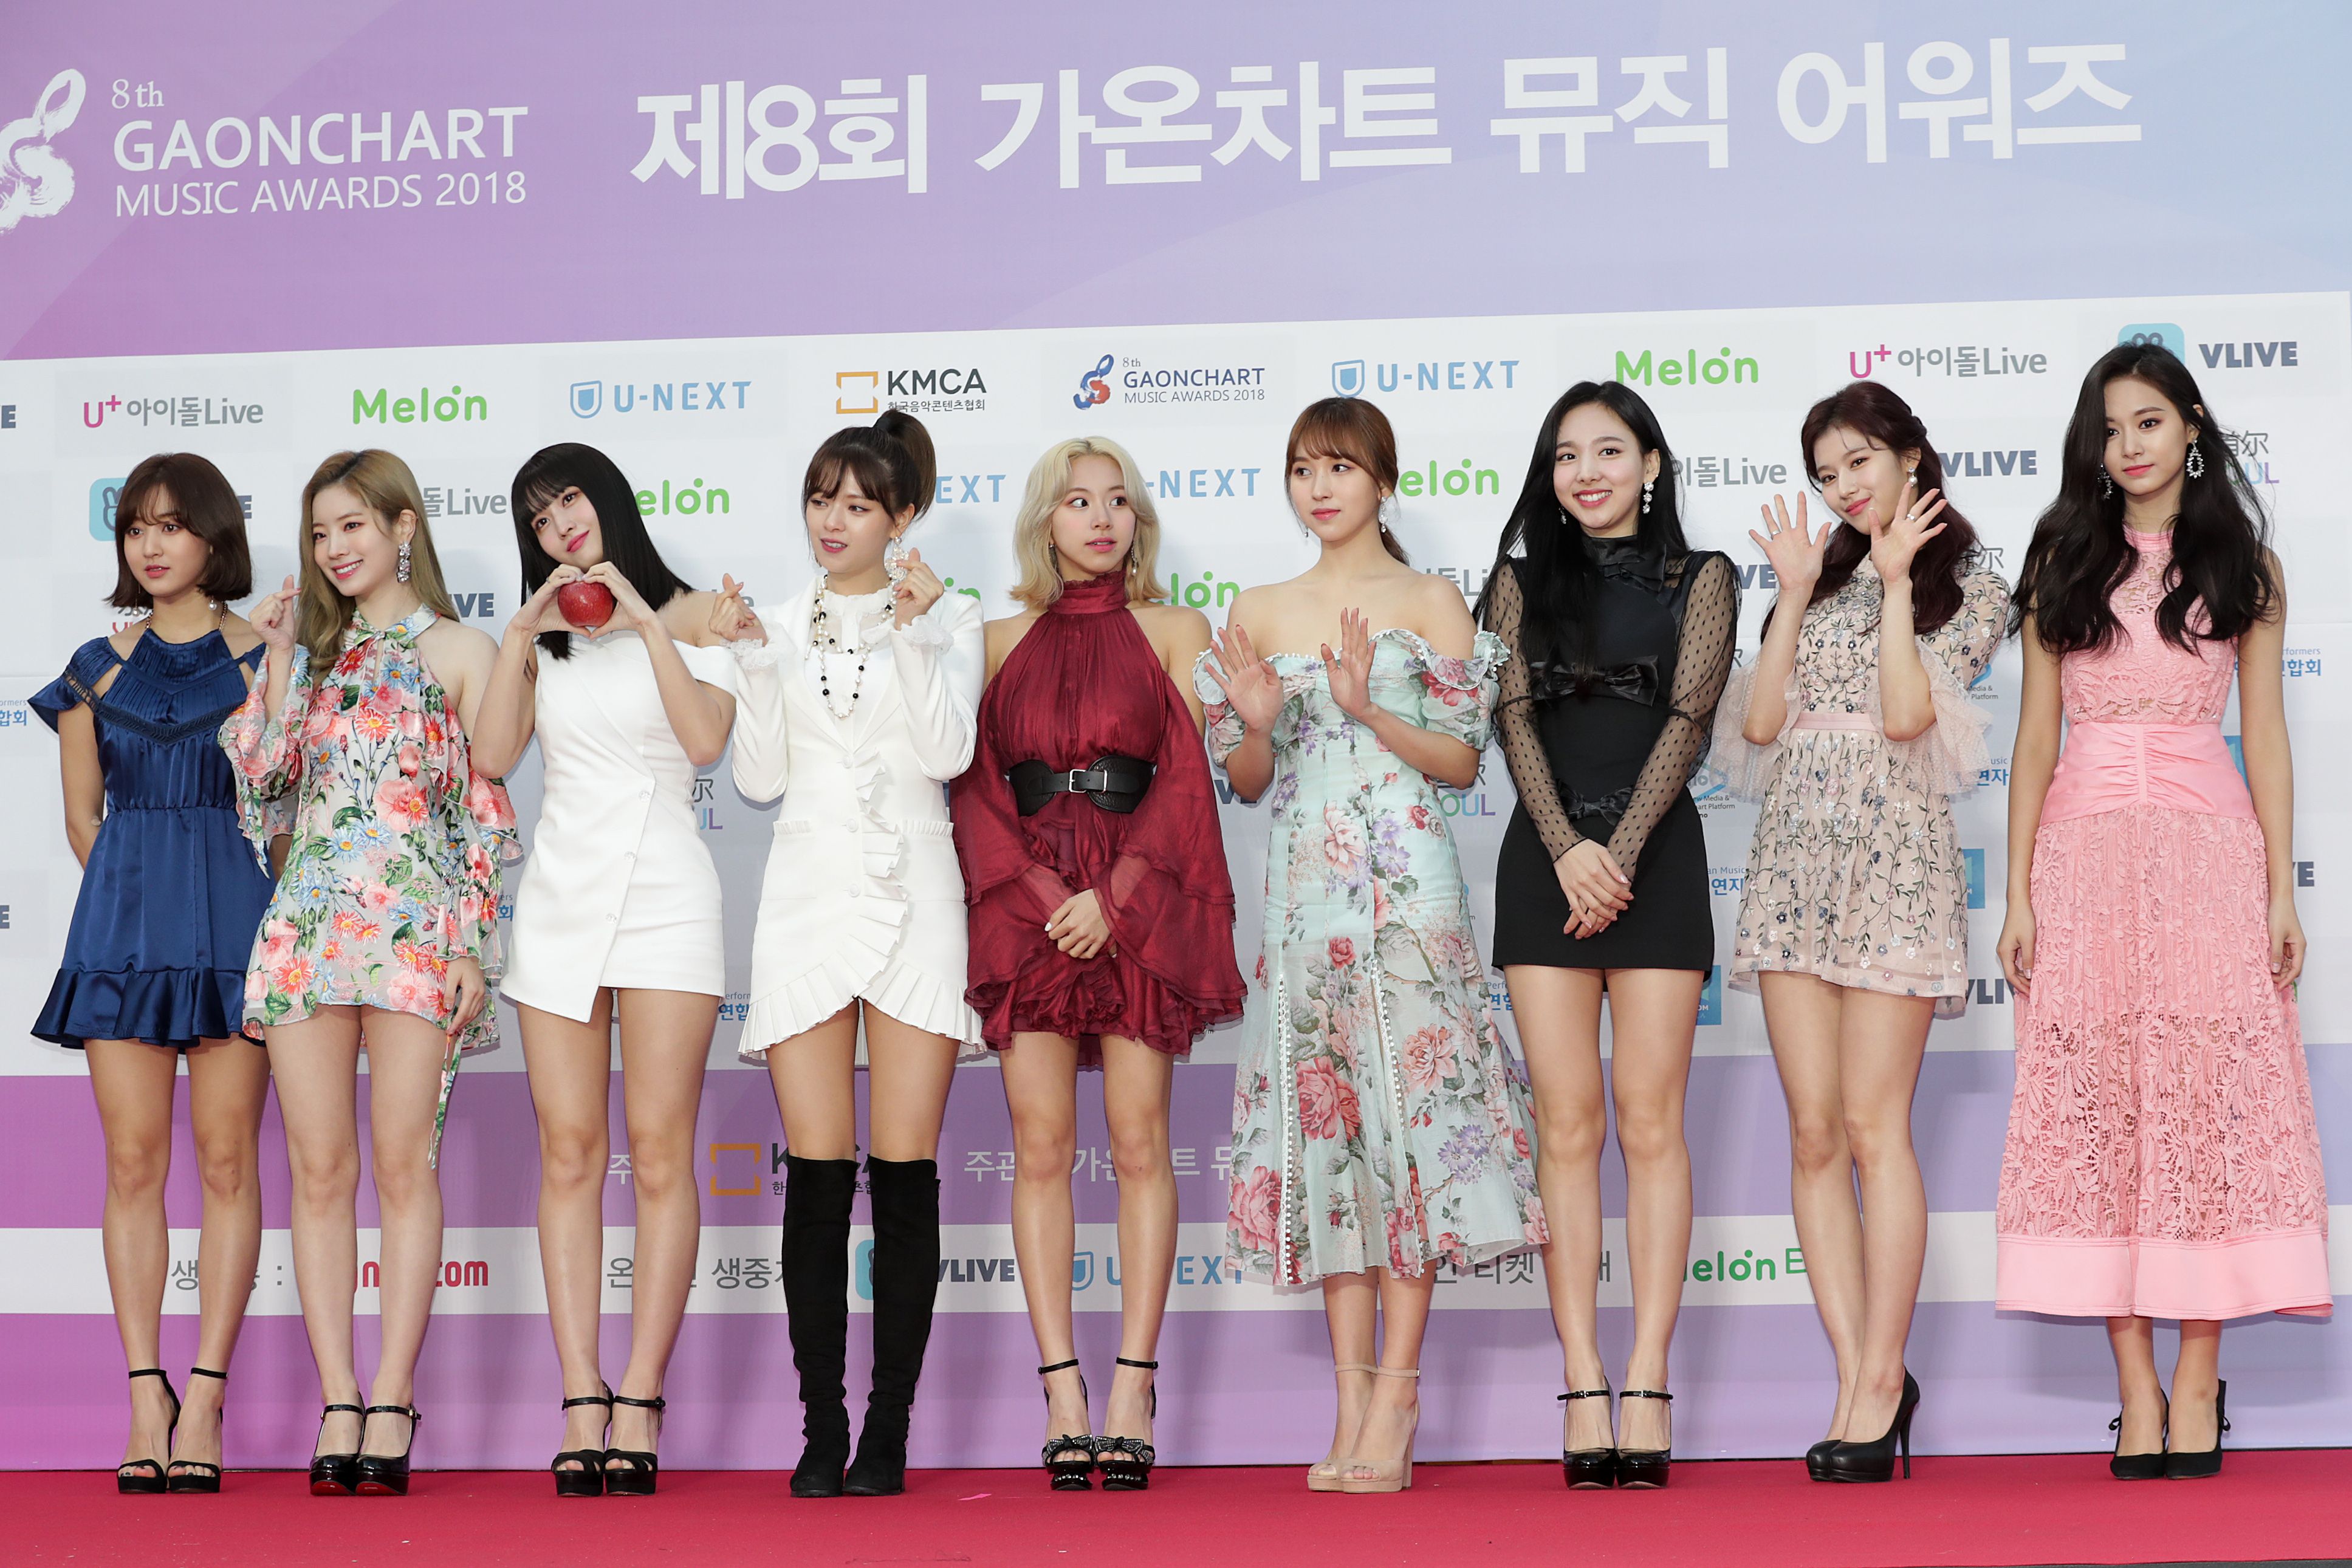 How Many Members are in Twice? All Twice Members and Roles, Explained